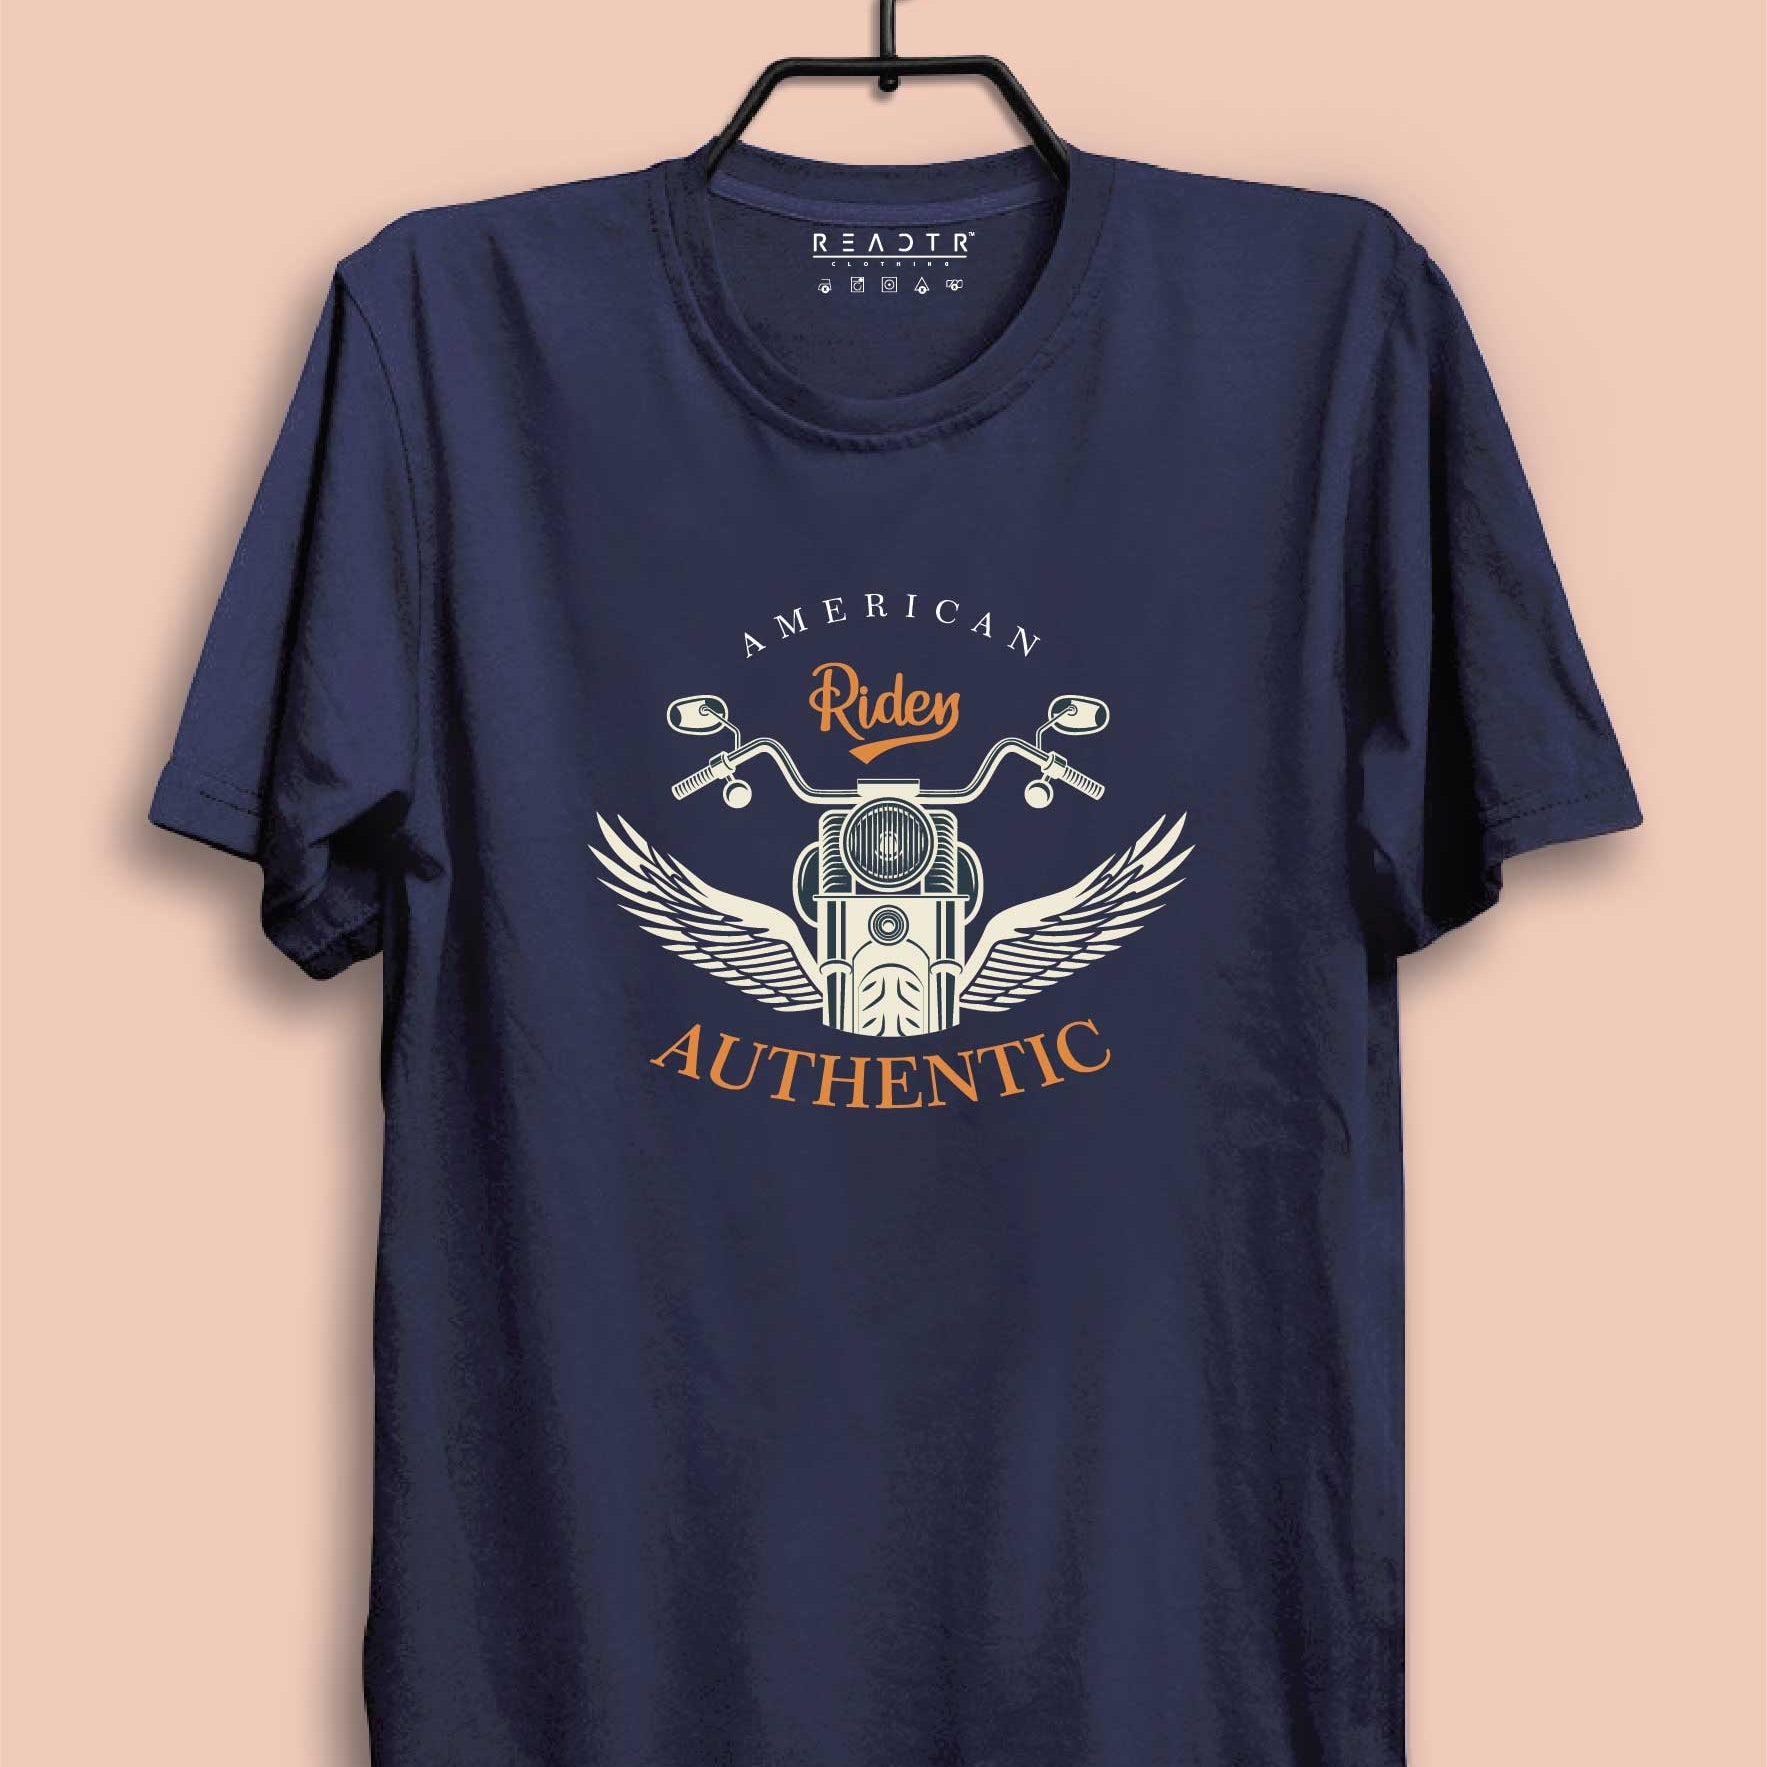 Authentic Rider Reactr Tshirts For Men - Eyewearlabs